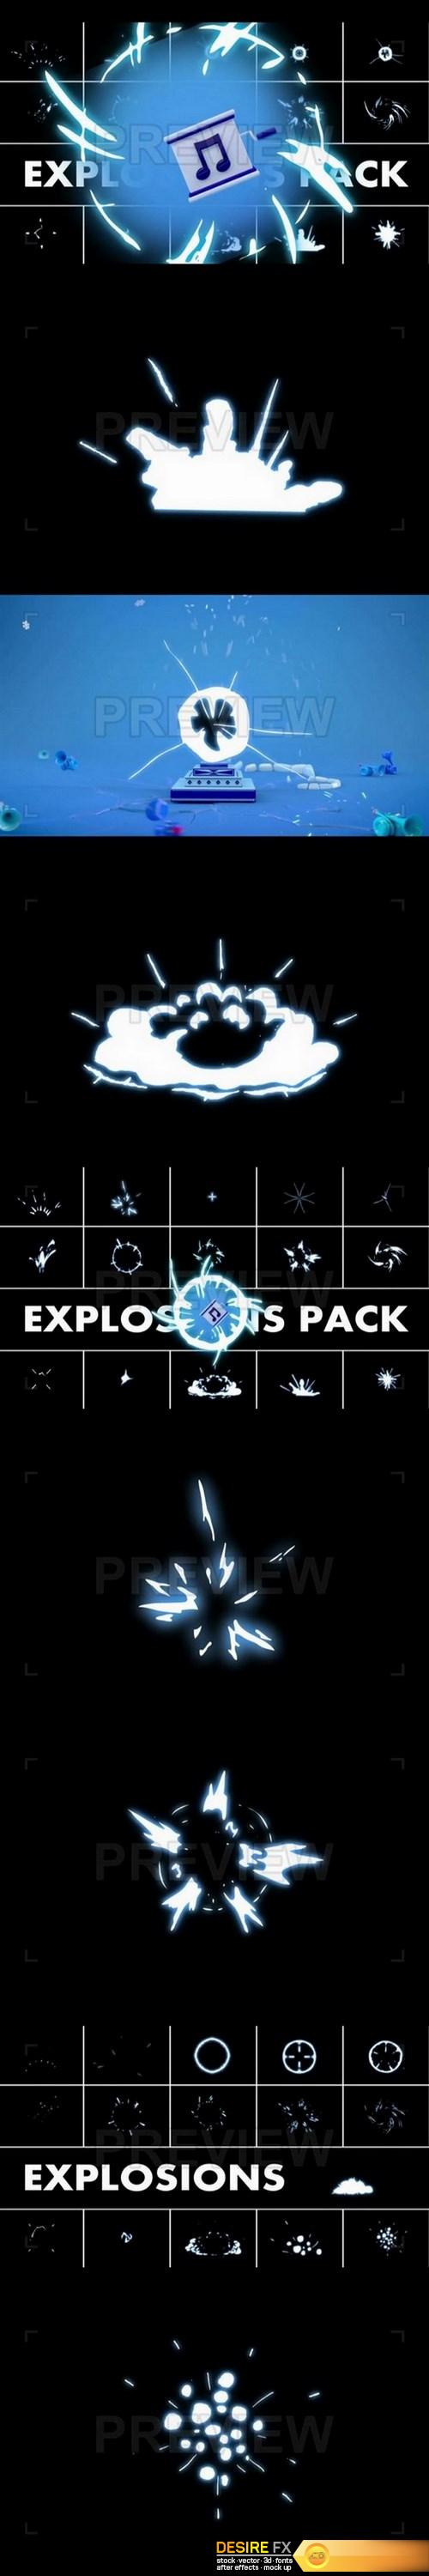 Explosion-elements-pack-2-21807